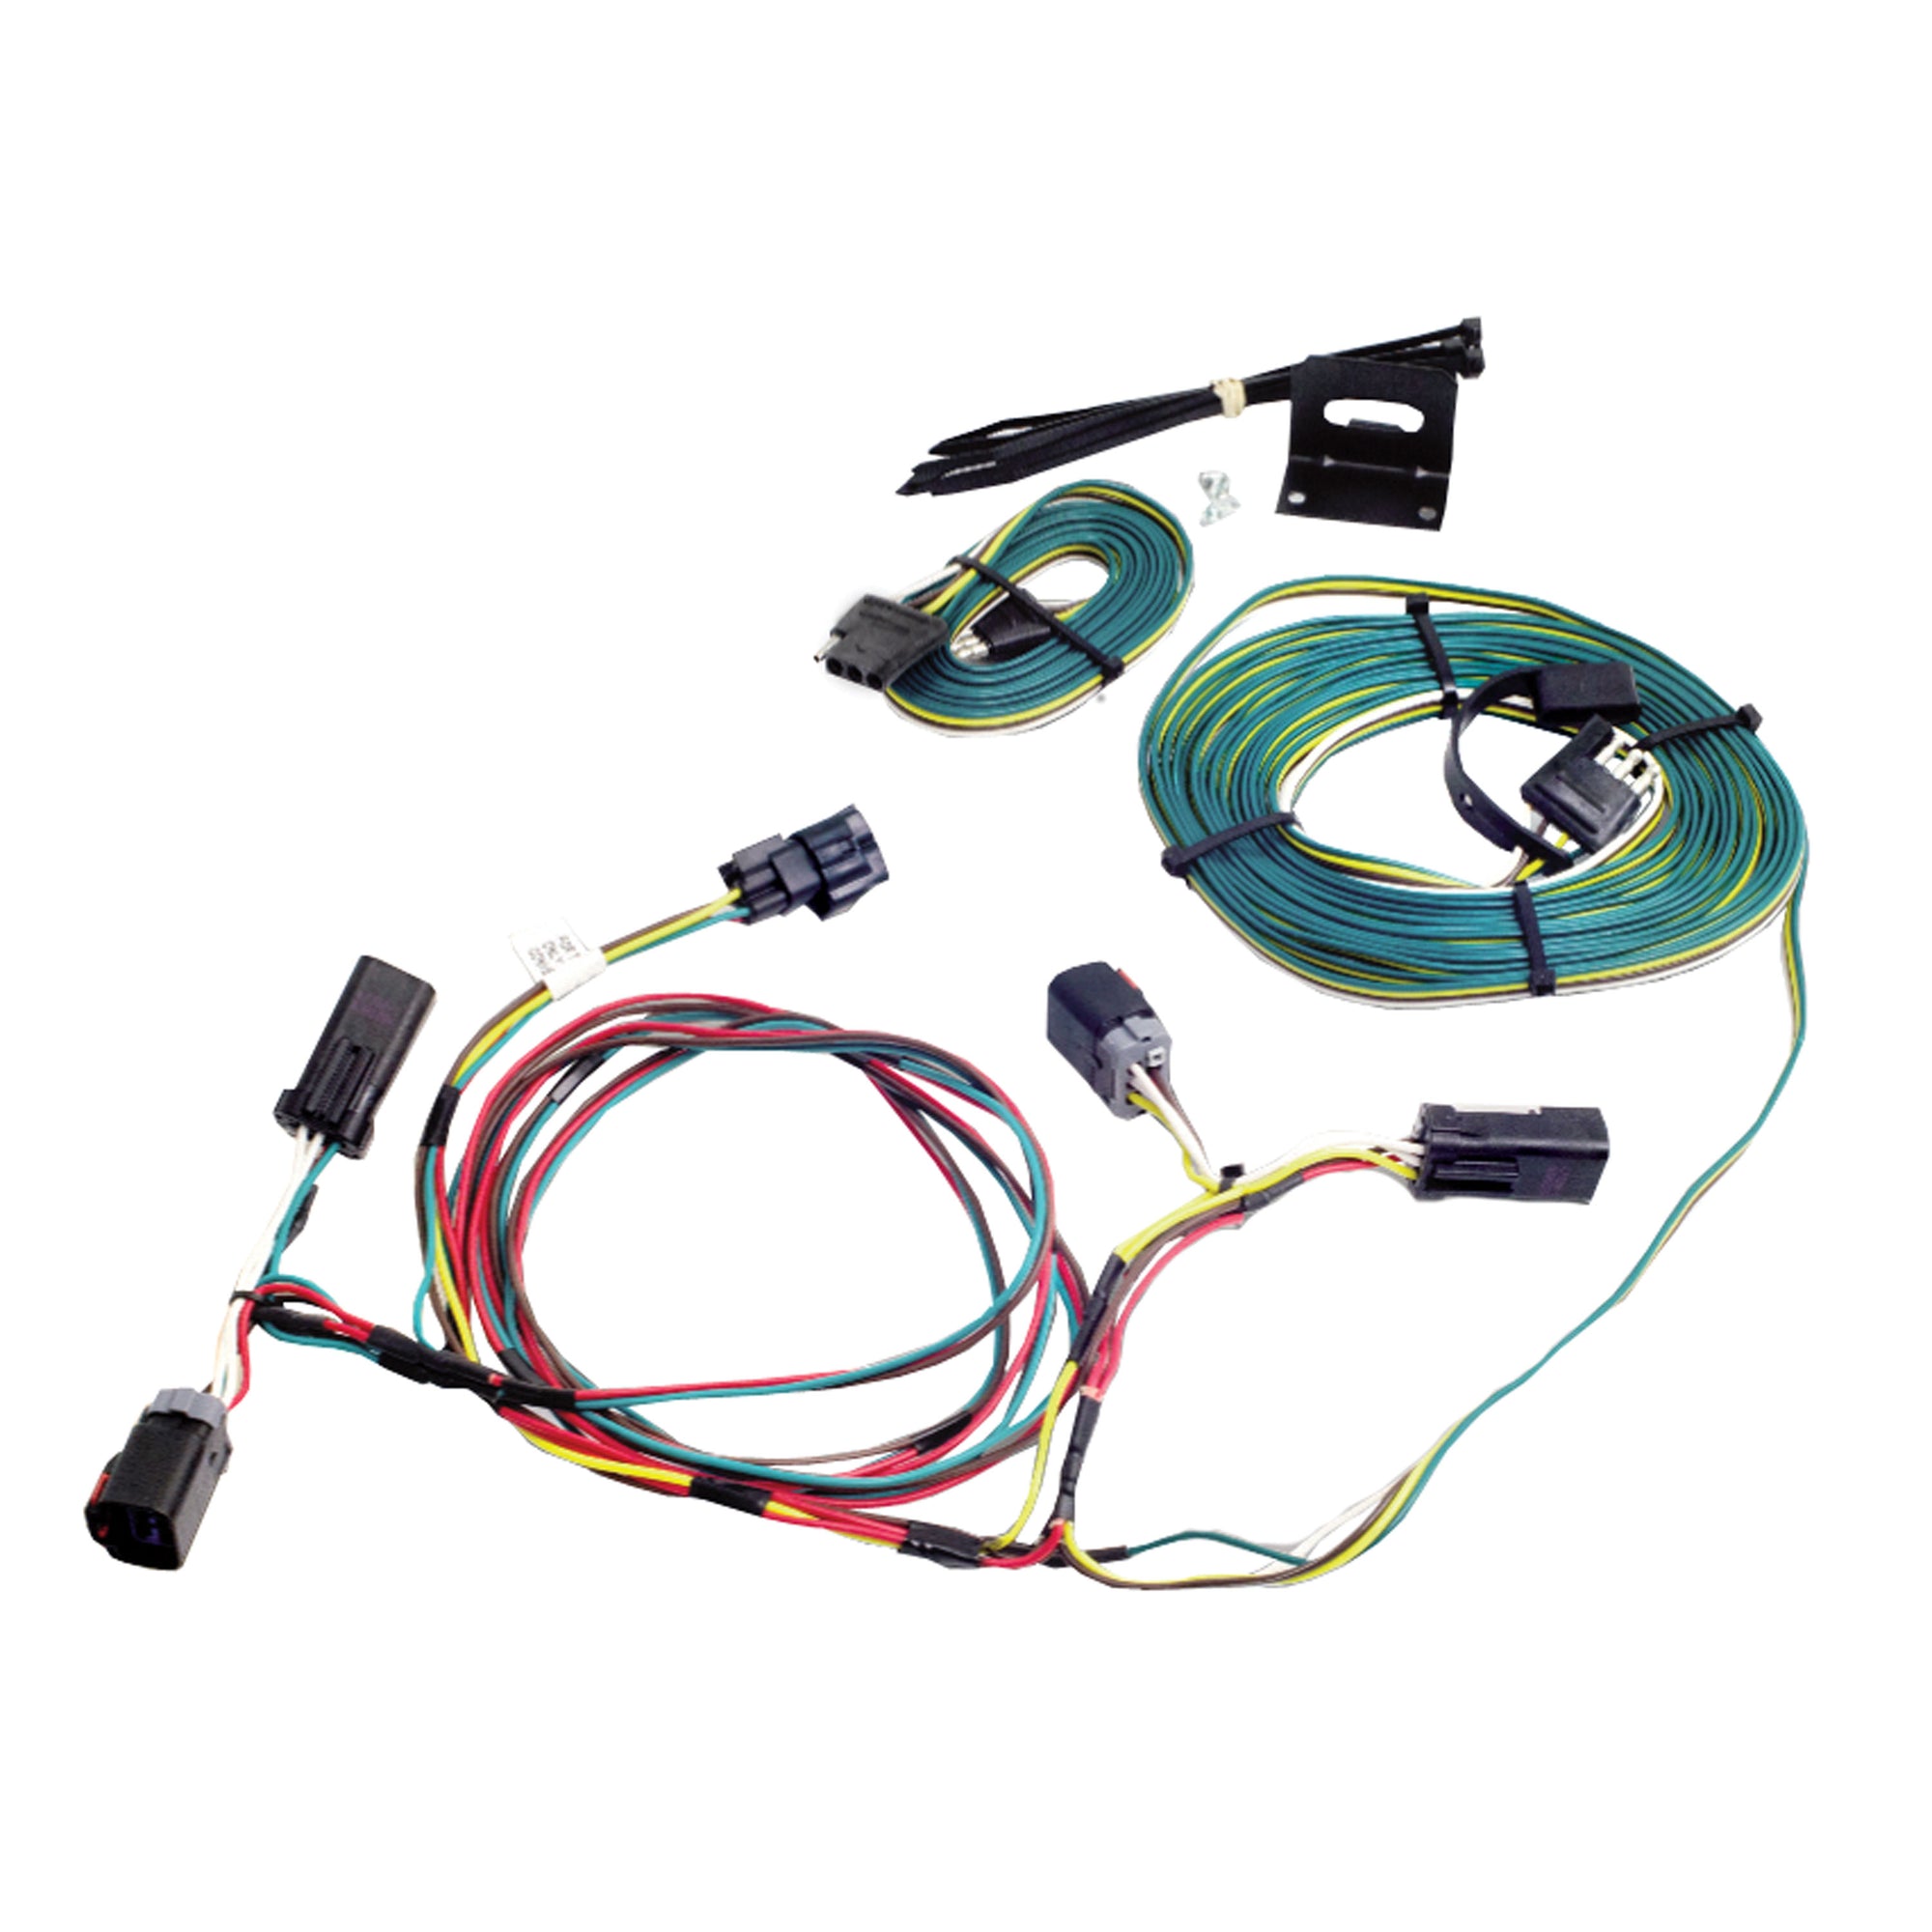 Demco 9523089 Towed Connector Vehicle Wiring Kit - For Jeep Grand Cherokee '99-'04